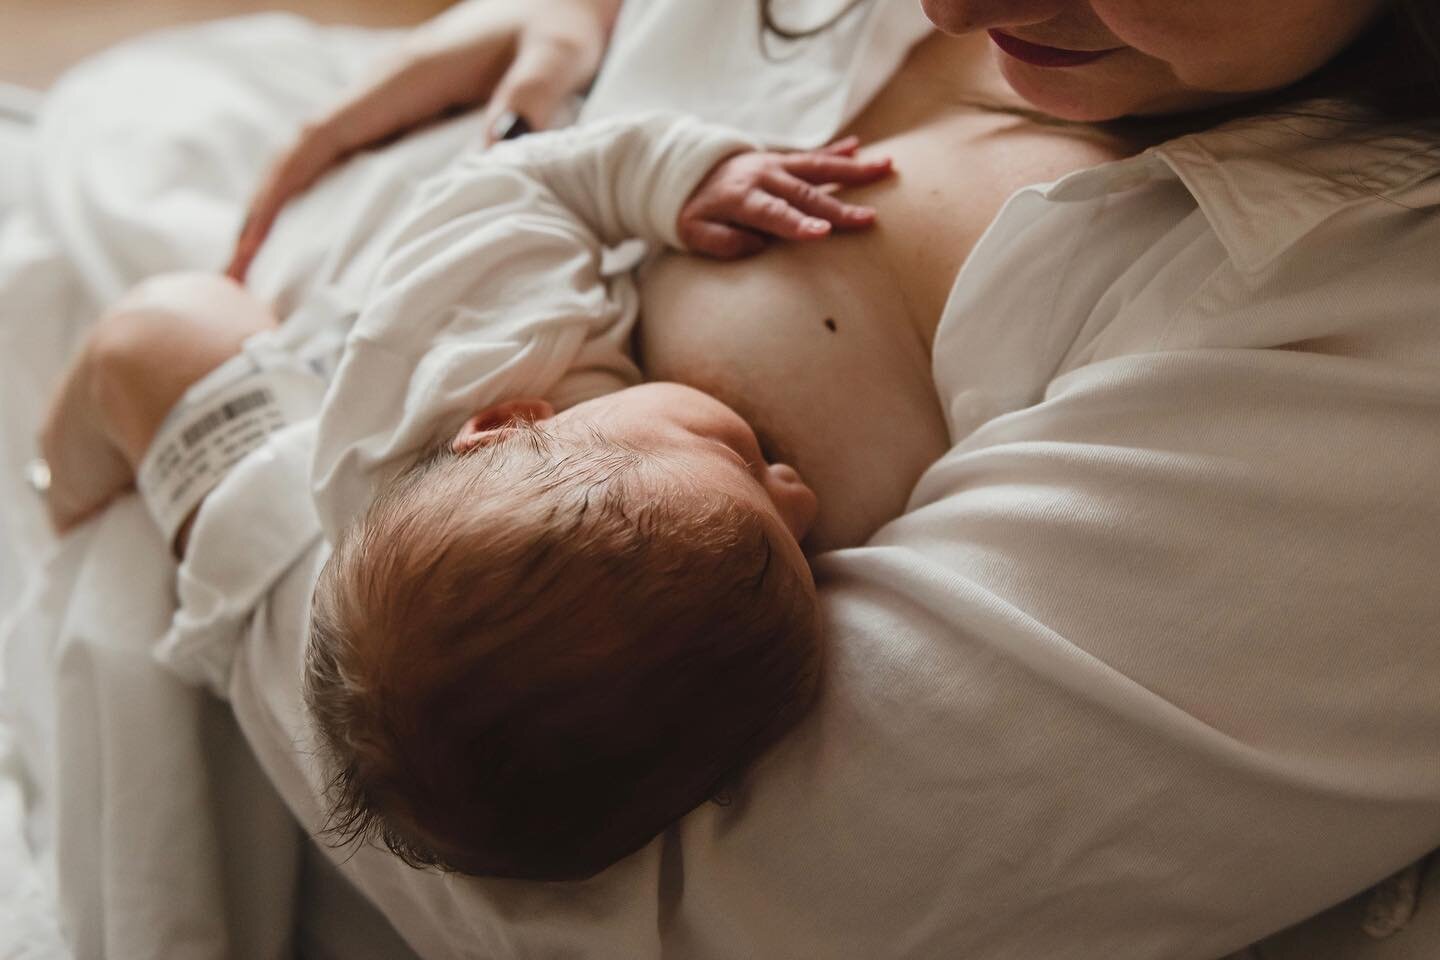 Those precious first hours and days of skin-to-skin bonding, nursing, studying every little feature and getting to know your new baby - ahh, that&rsquo;s the good stuff ❤️
.
.
.
#cwpbirthstories #storyteller #birthphotography #birthphotographer #loui